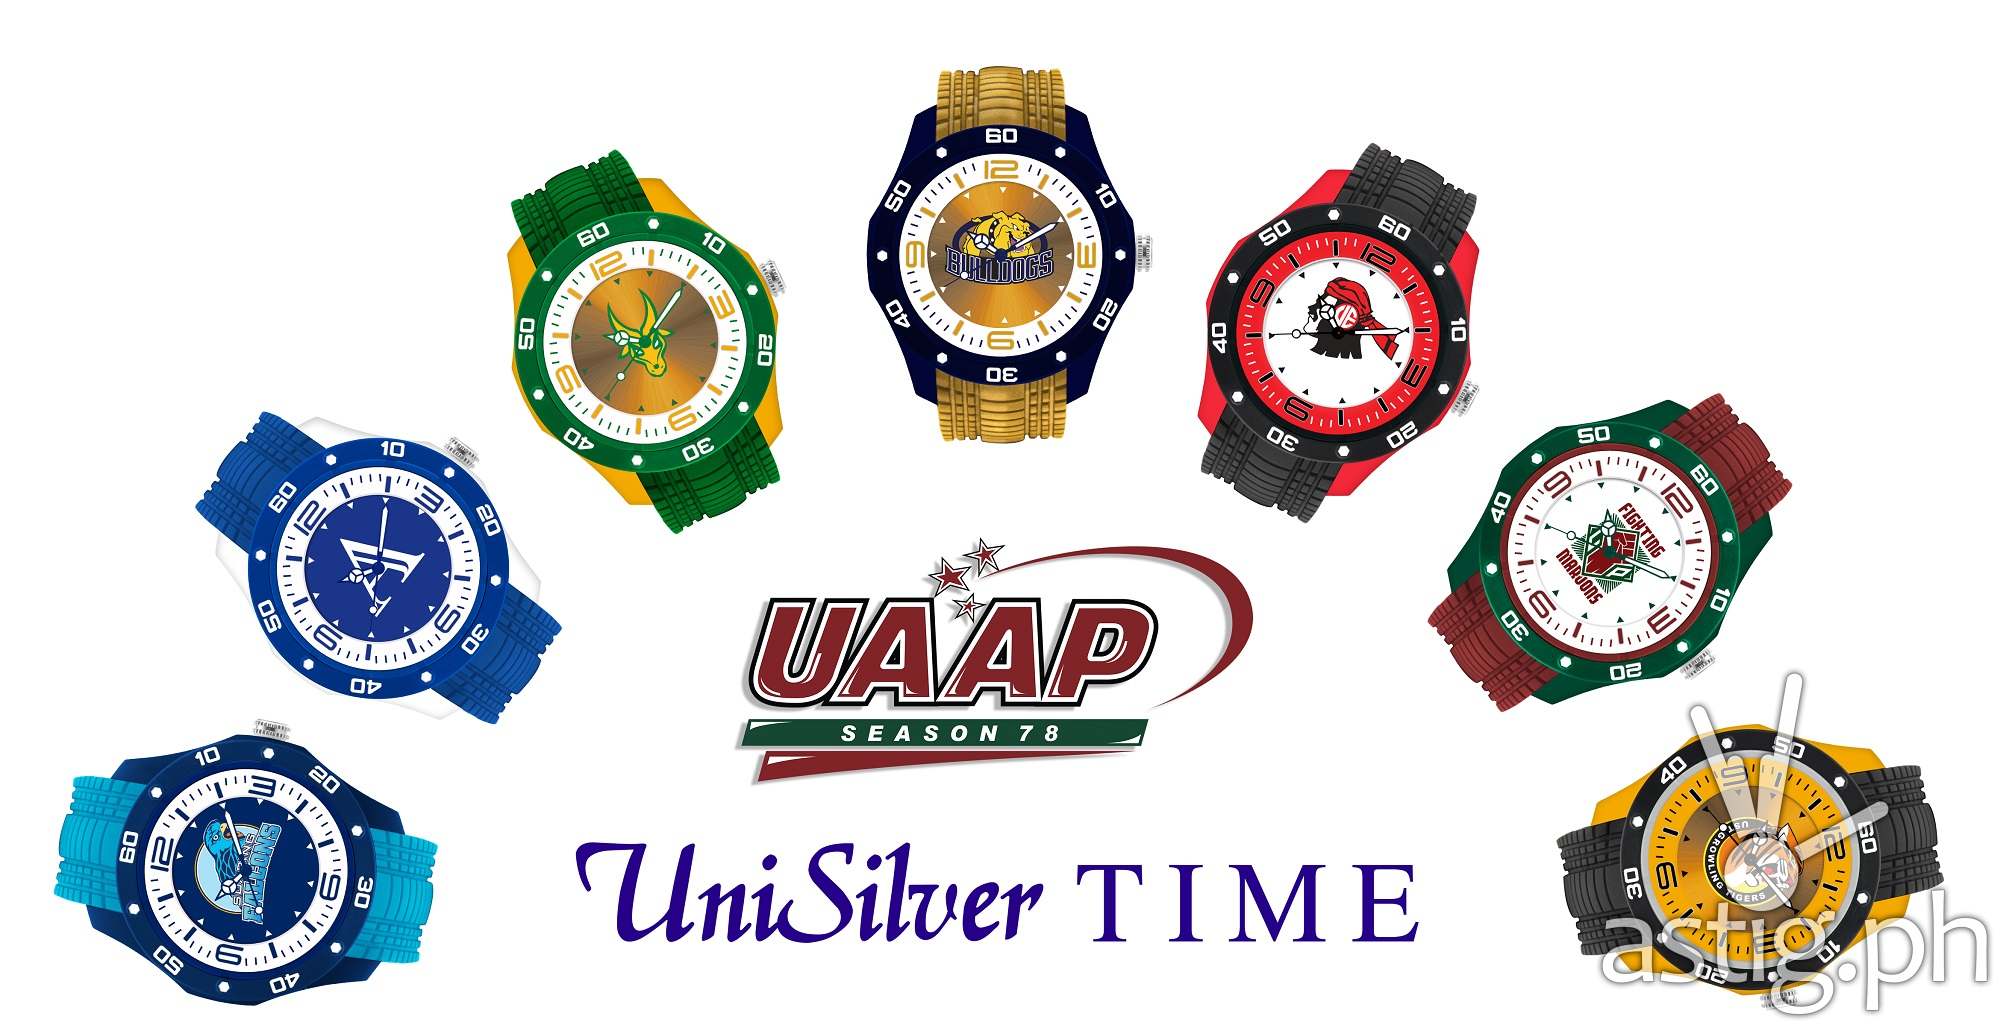 UAAP UniSilver Watches